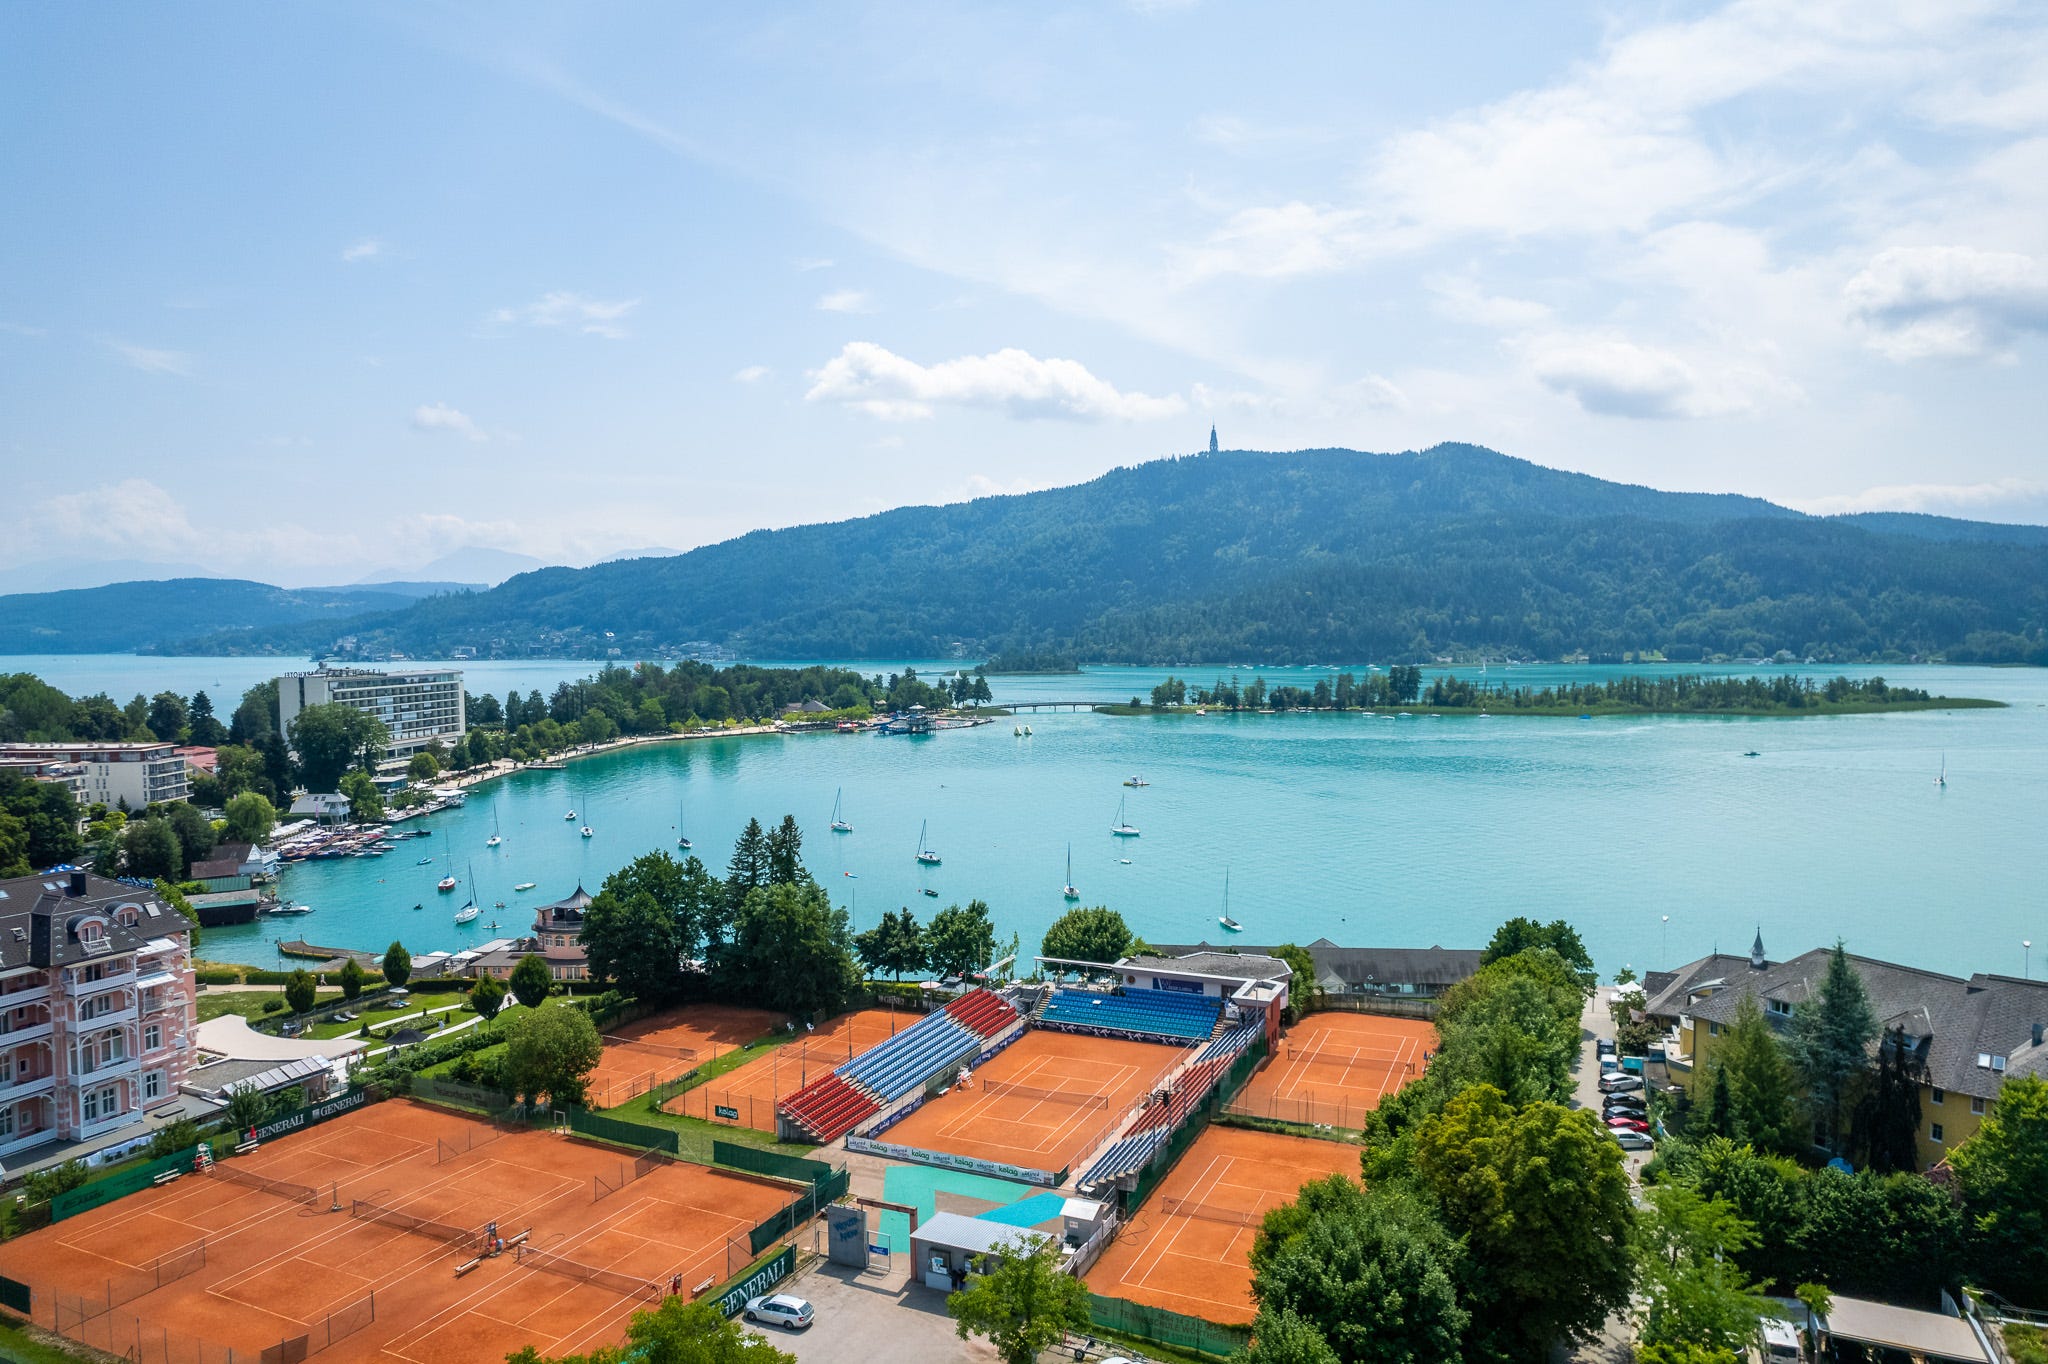 Lots of tennis among the proposals All the beauty of Carinthia, where getting bored is impossible